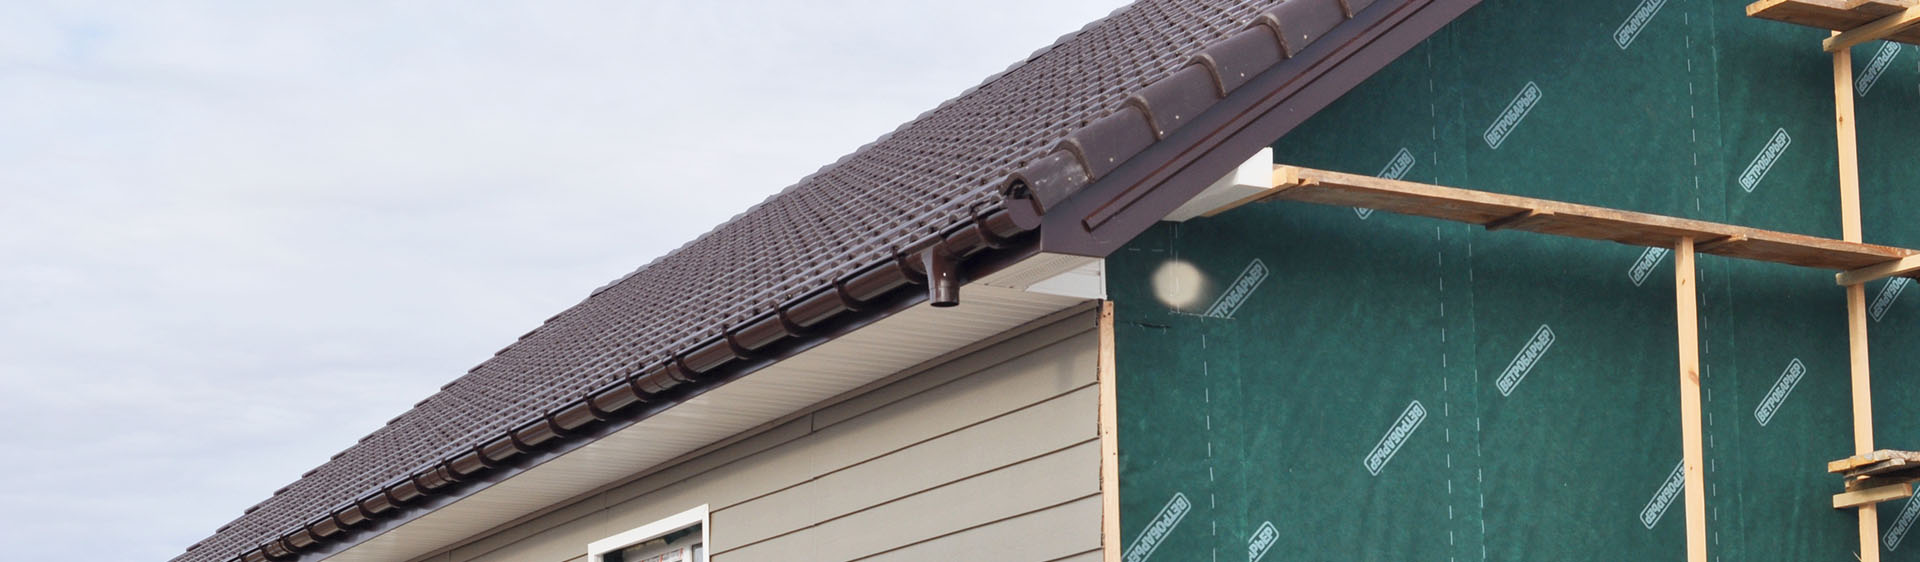 North Augusta, SC Gutter Cleaning, Gutter Installation and Siding Services